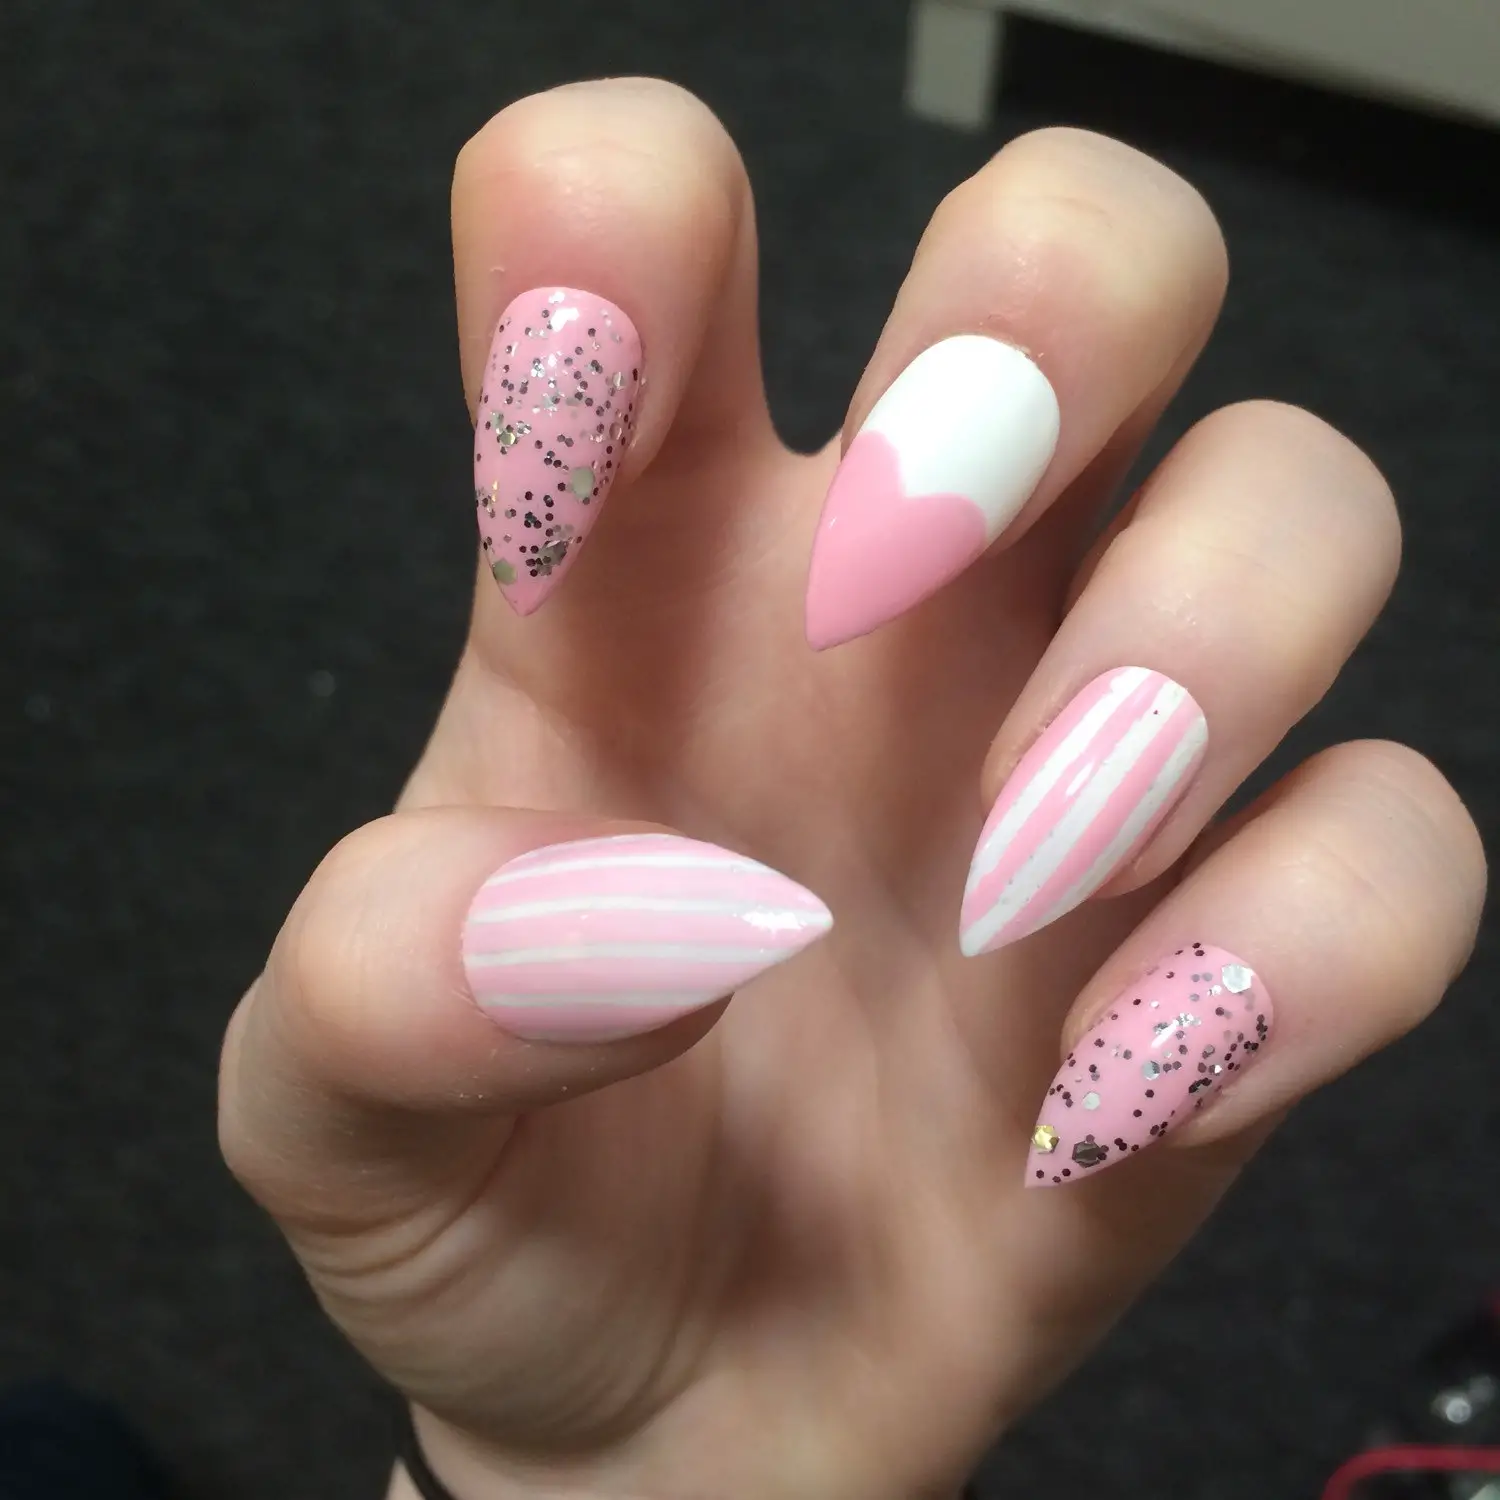 Fun and Pretty Pink and White Acrylic Nails